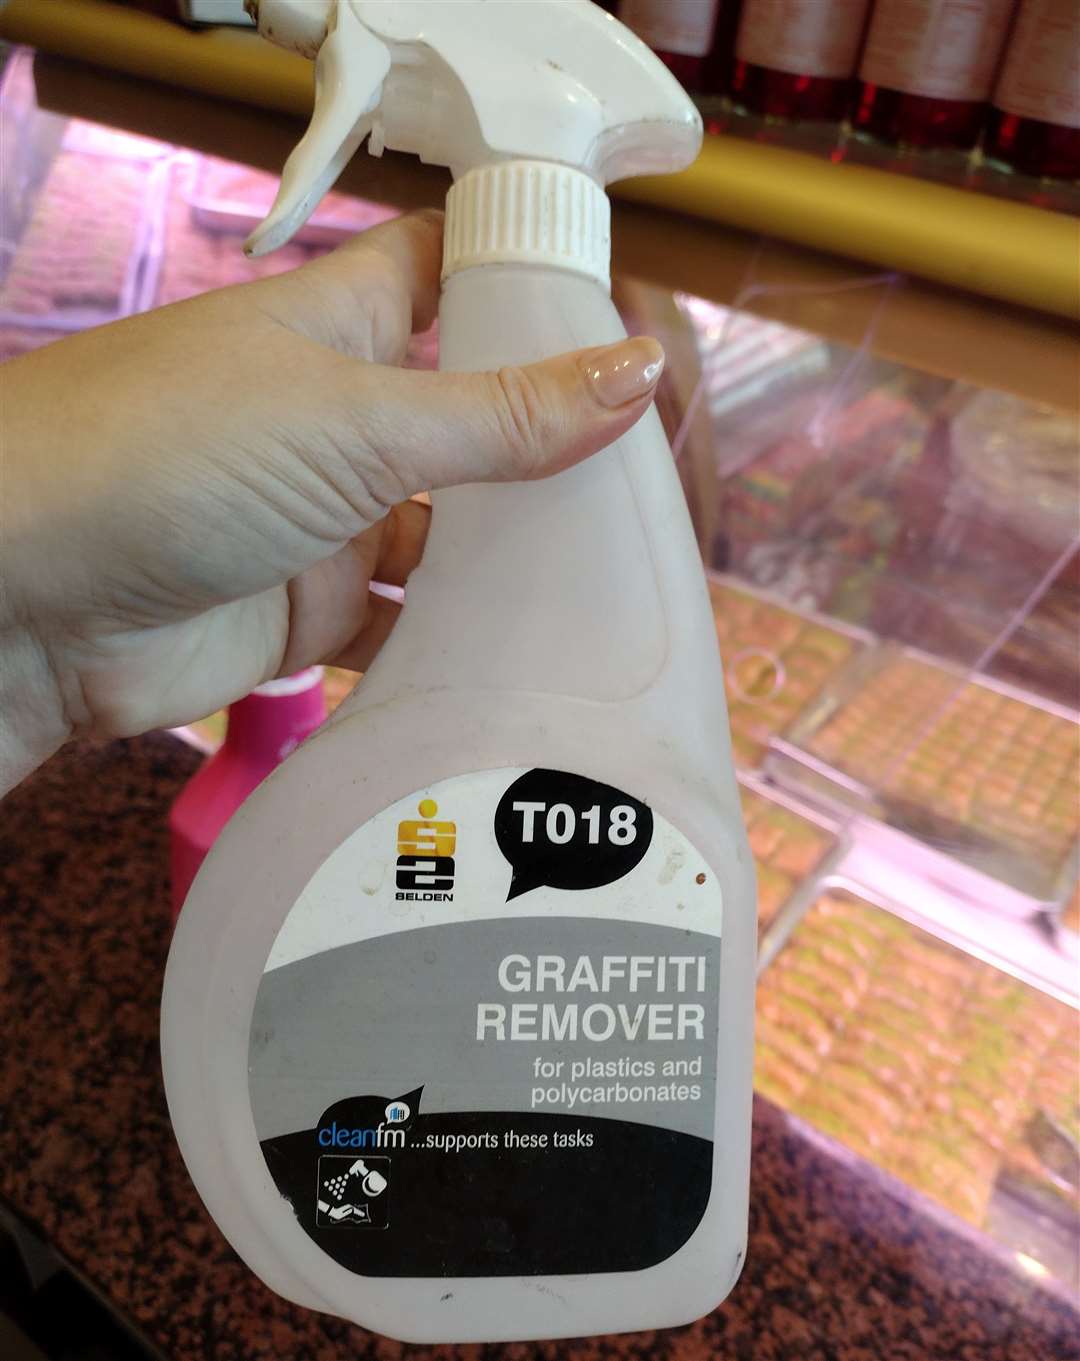 The graffiti removal fluid found by inspectors during their visit to Dubai Market in August. Picture: Thanet District Council